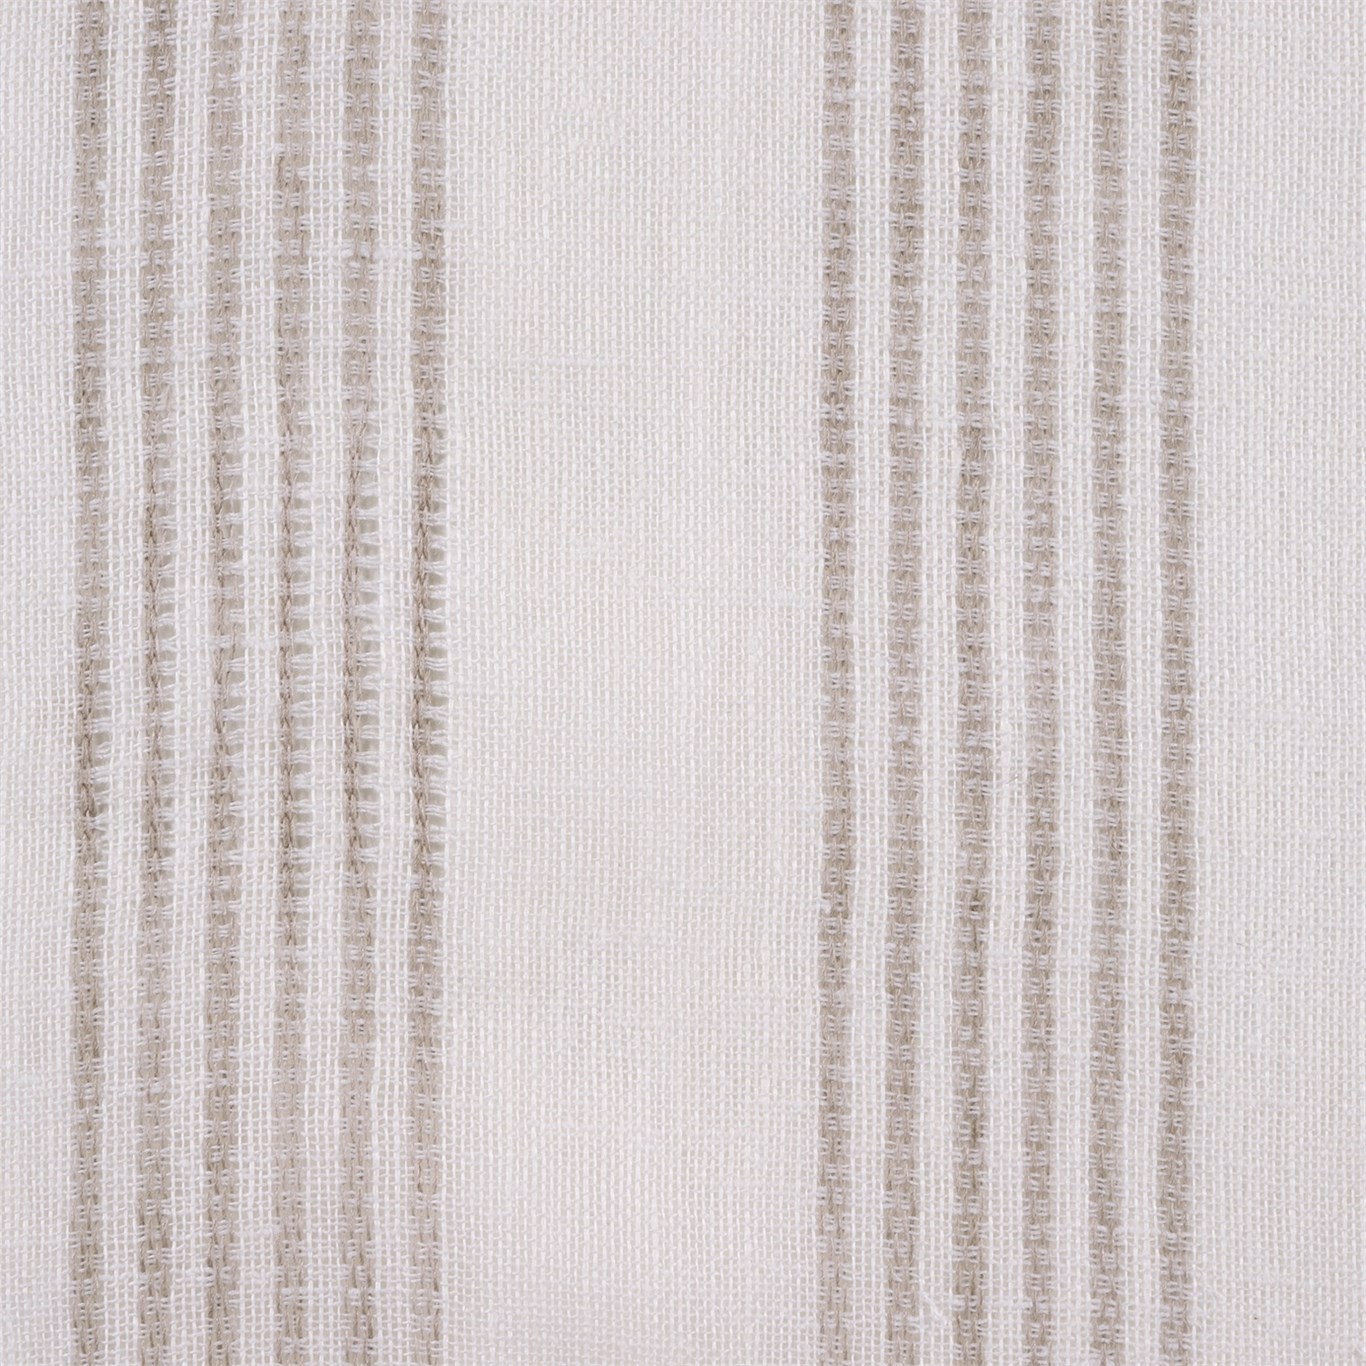 Purity Voiles Snow/Dove Fabric by HAR